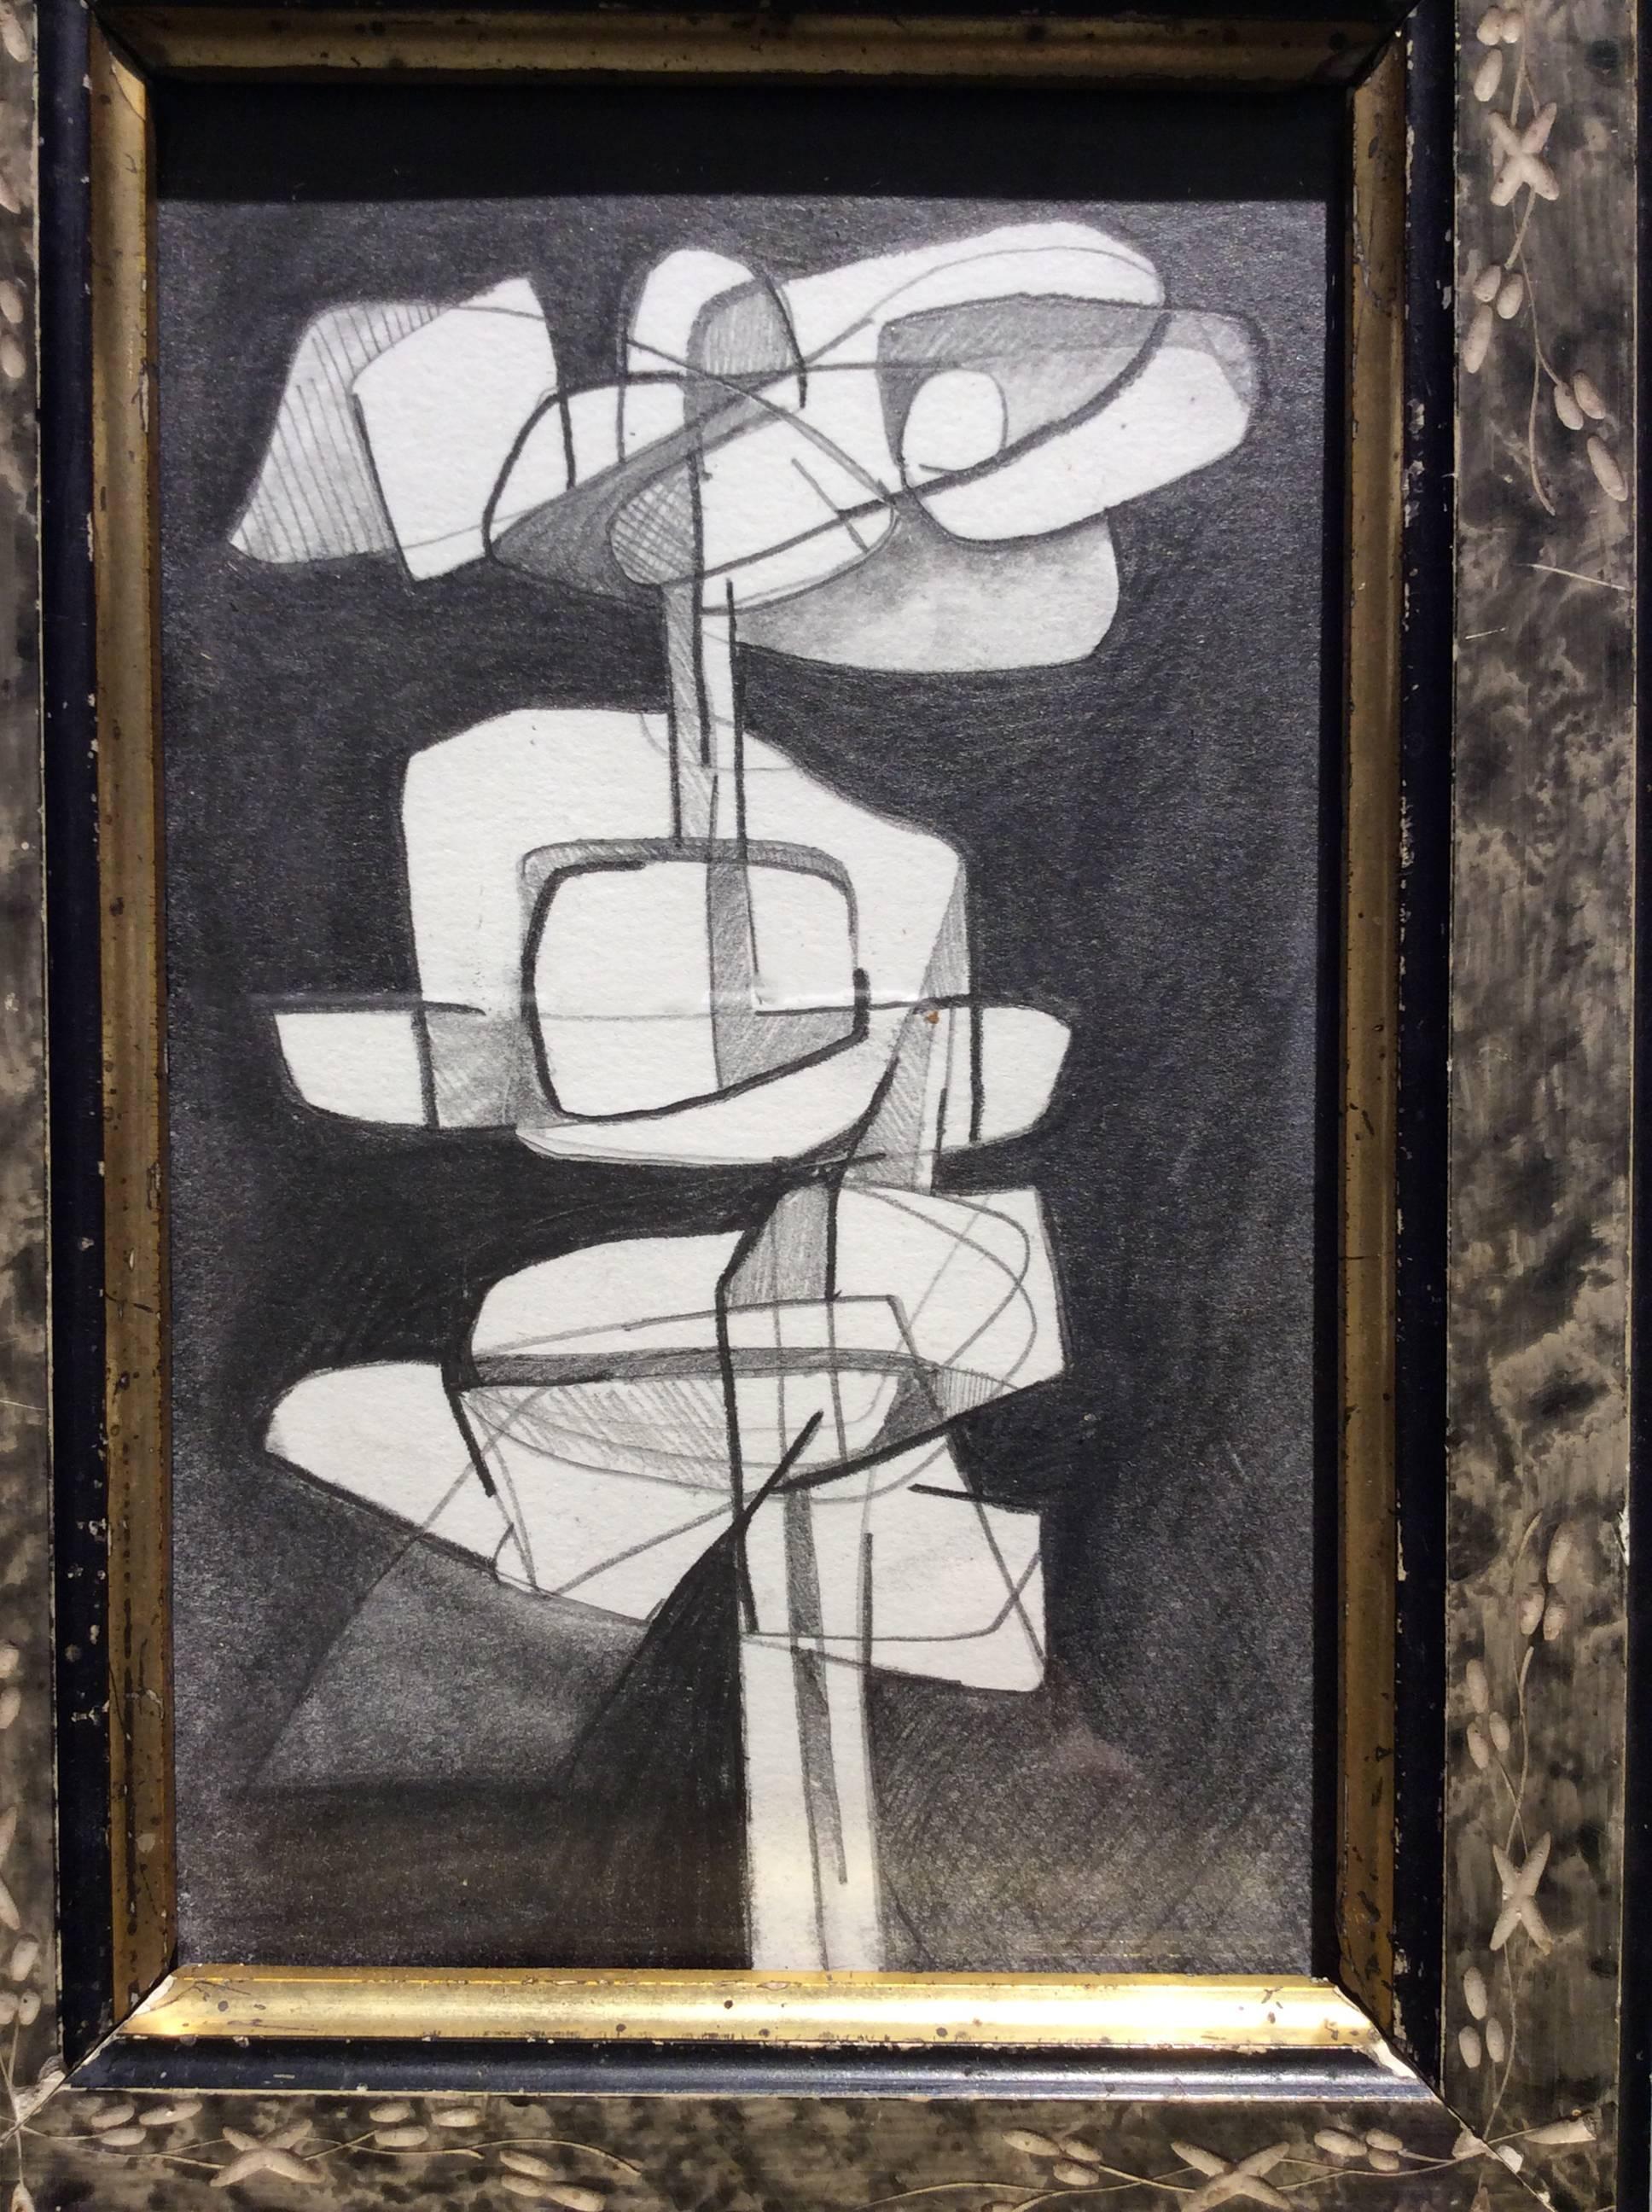 graphite on paper in vintage frame with engraved floral details
8 x 6 inches framed
6.25 x 4 inches unframed

This graphite work on paper was inspired by academic paintings of the Infanta Margarita. The work is drawn in an abstracted cubist style